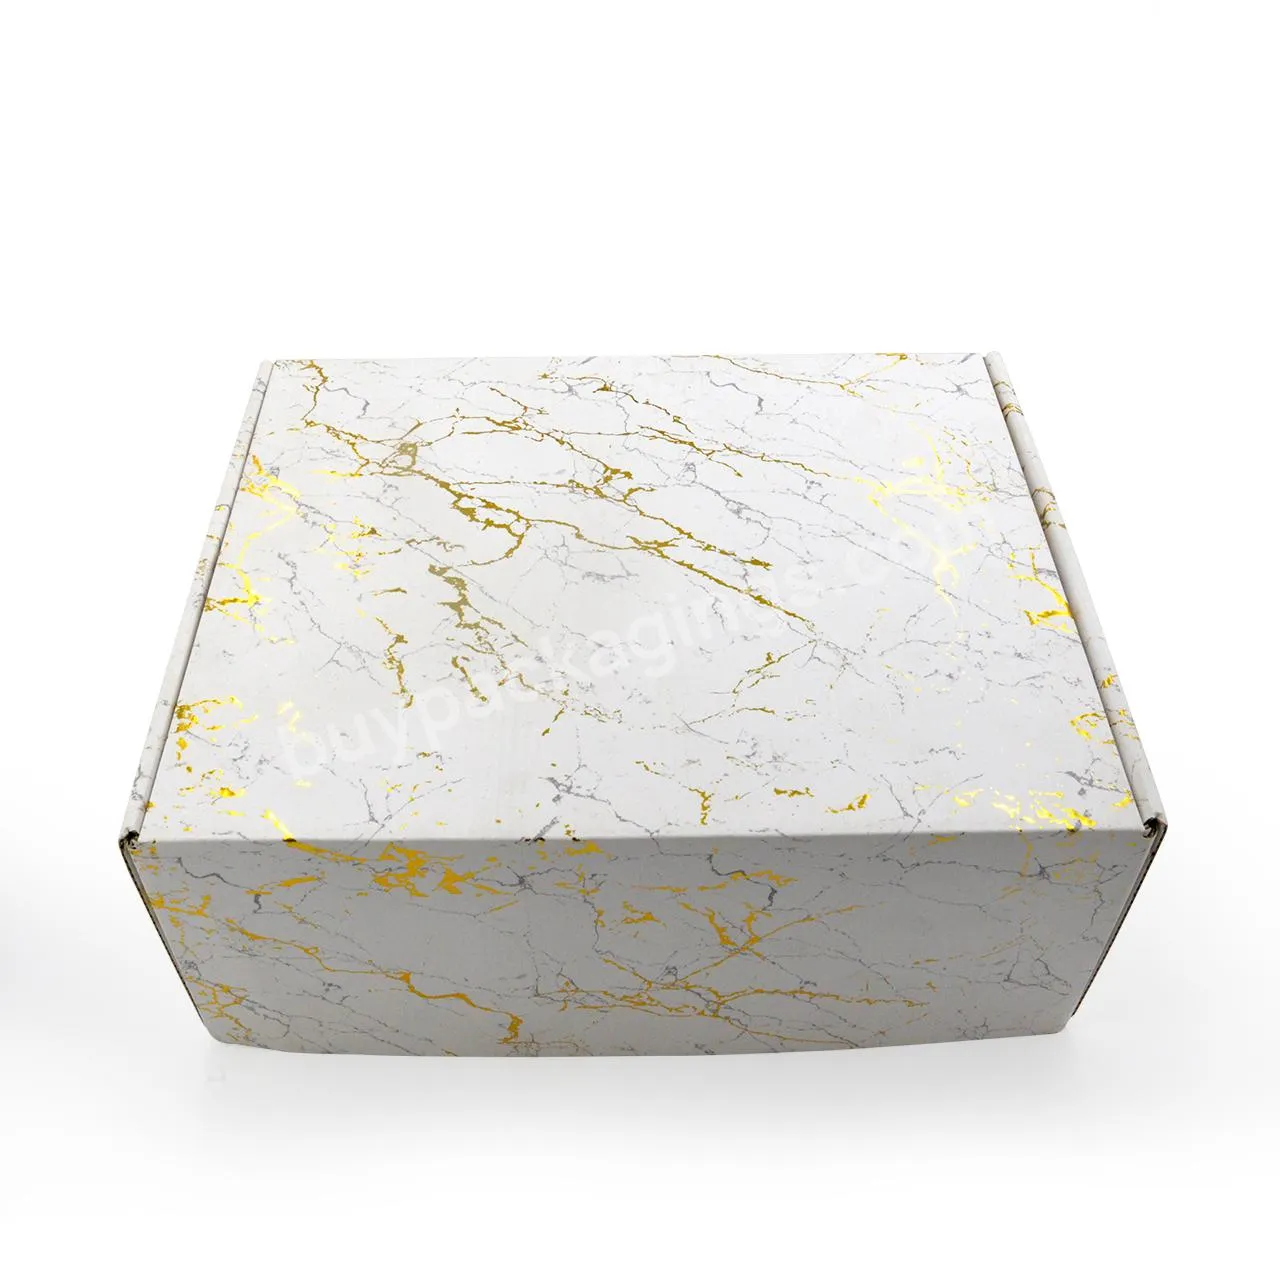 Customized White Marble Gold Favor Box Packaging With Gold Inlay And Vein